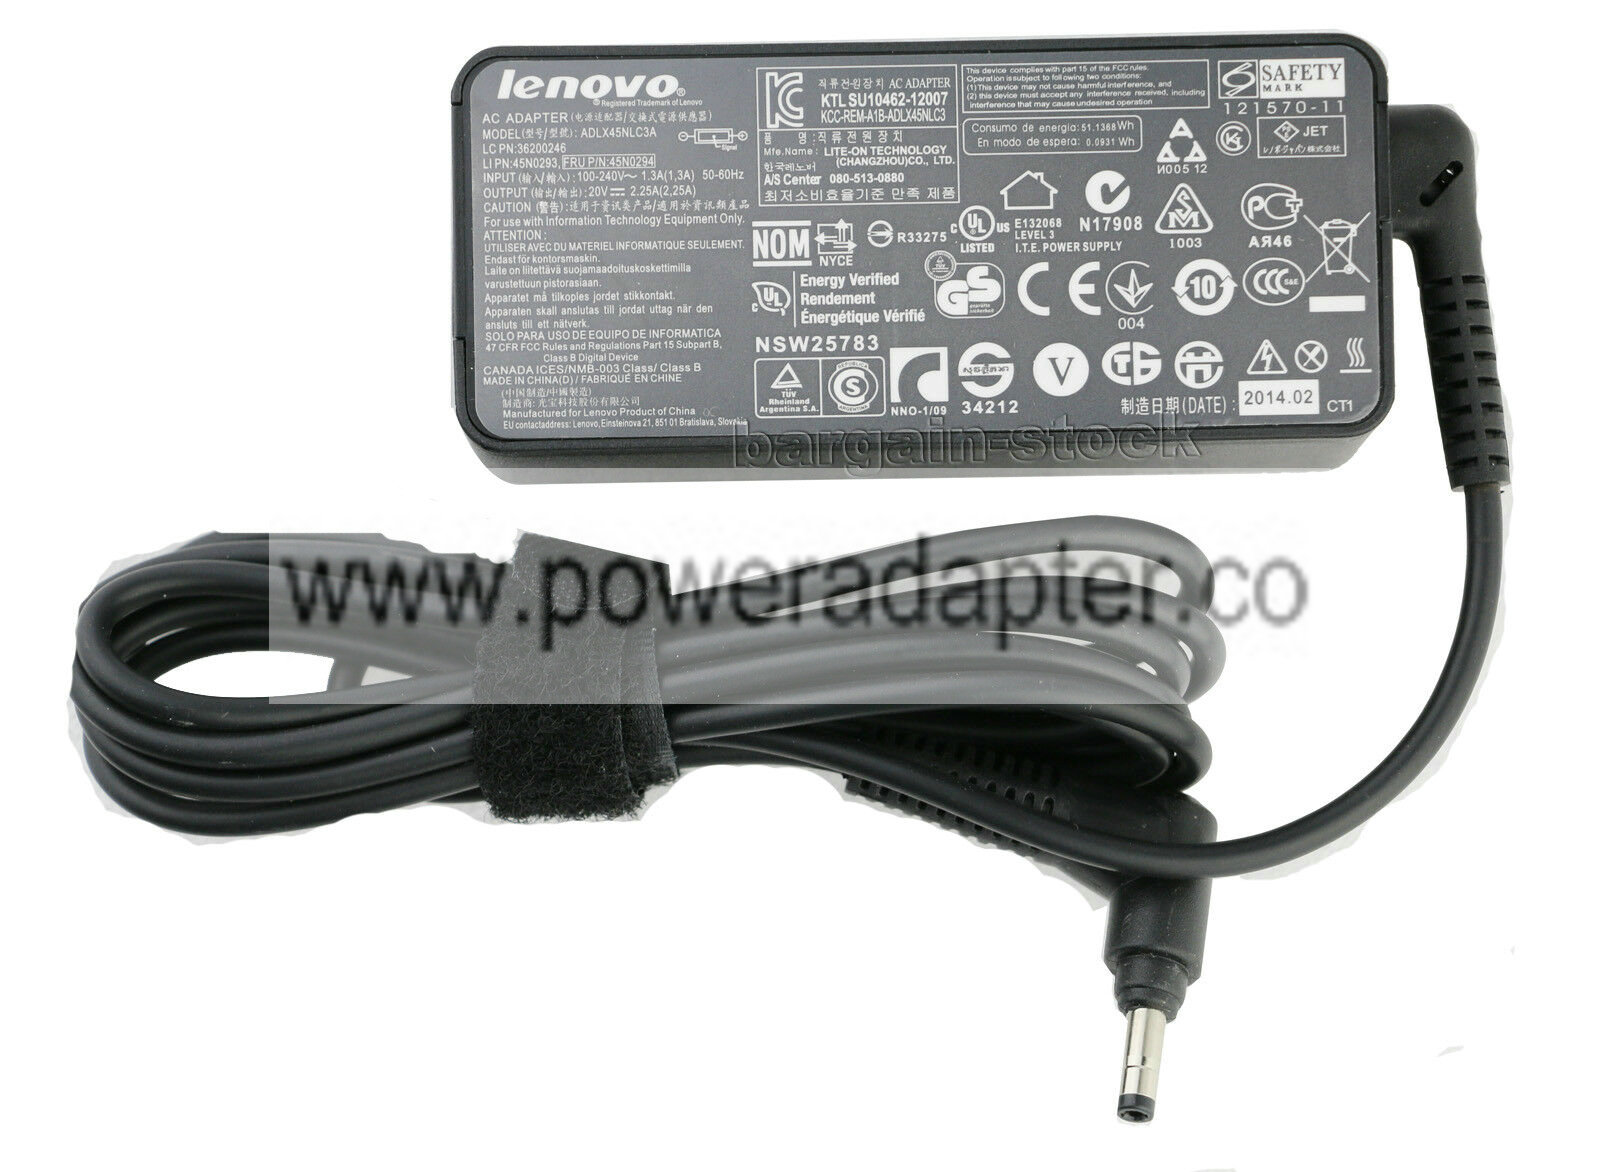 ADP-45DWA,ADLX45NLC3A,45N0294 20V 45W AC Adapter Charger For Lenovo Flex 4 4-1470 4-1570 ADLX45NLC3A Compatible Brand: